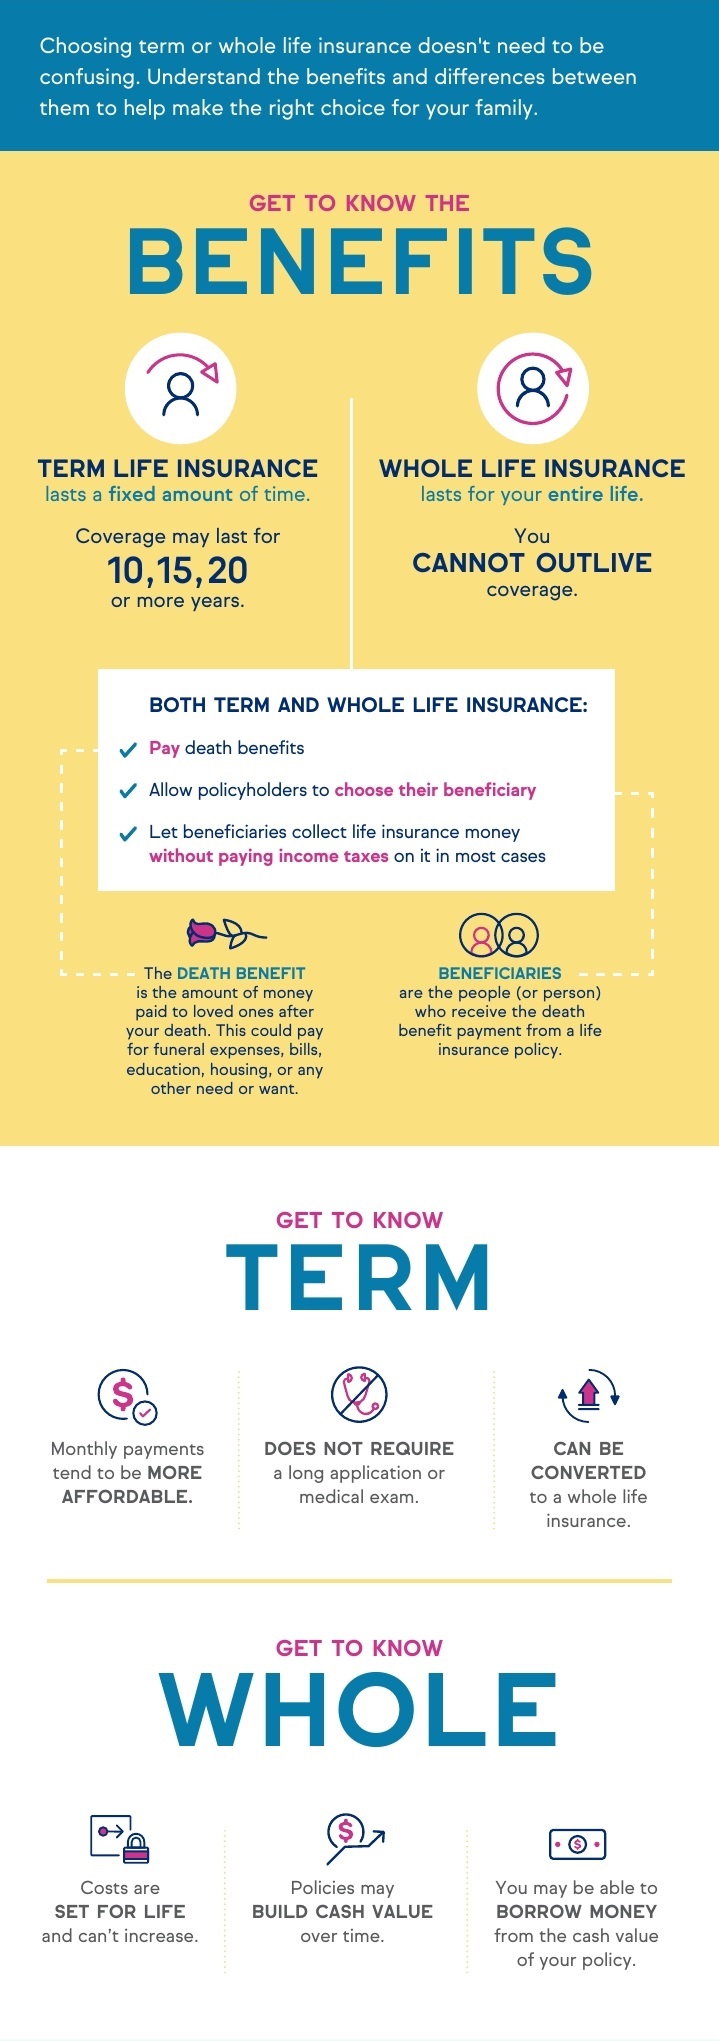 Learn the differences between term life and whole life insurance with this handy TruStage Insurance infographic.